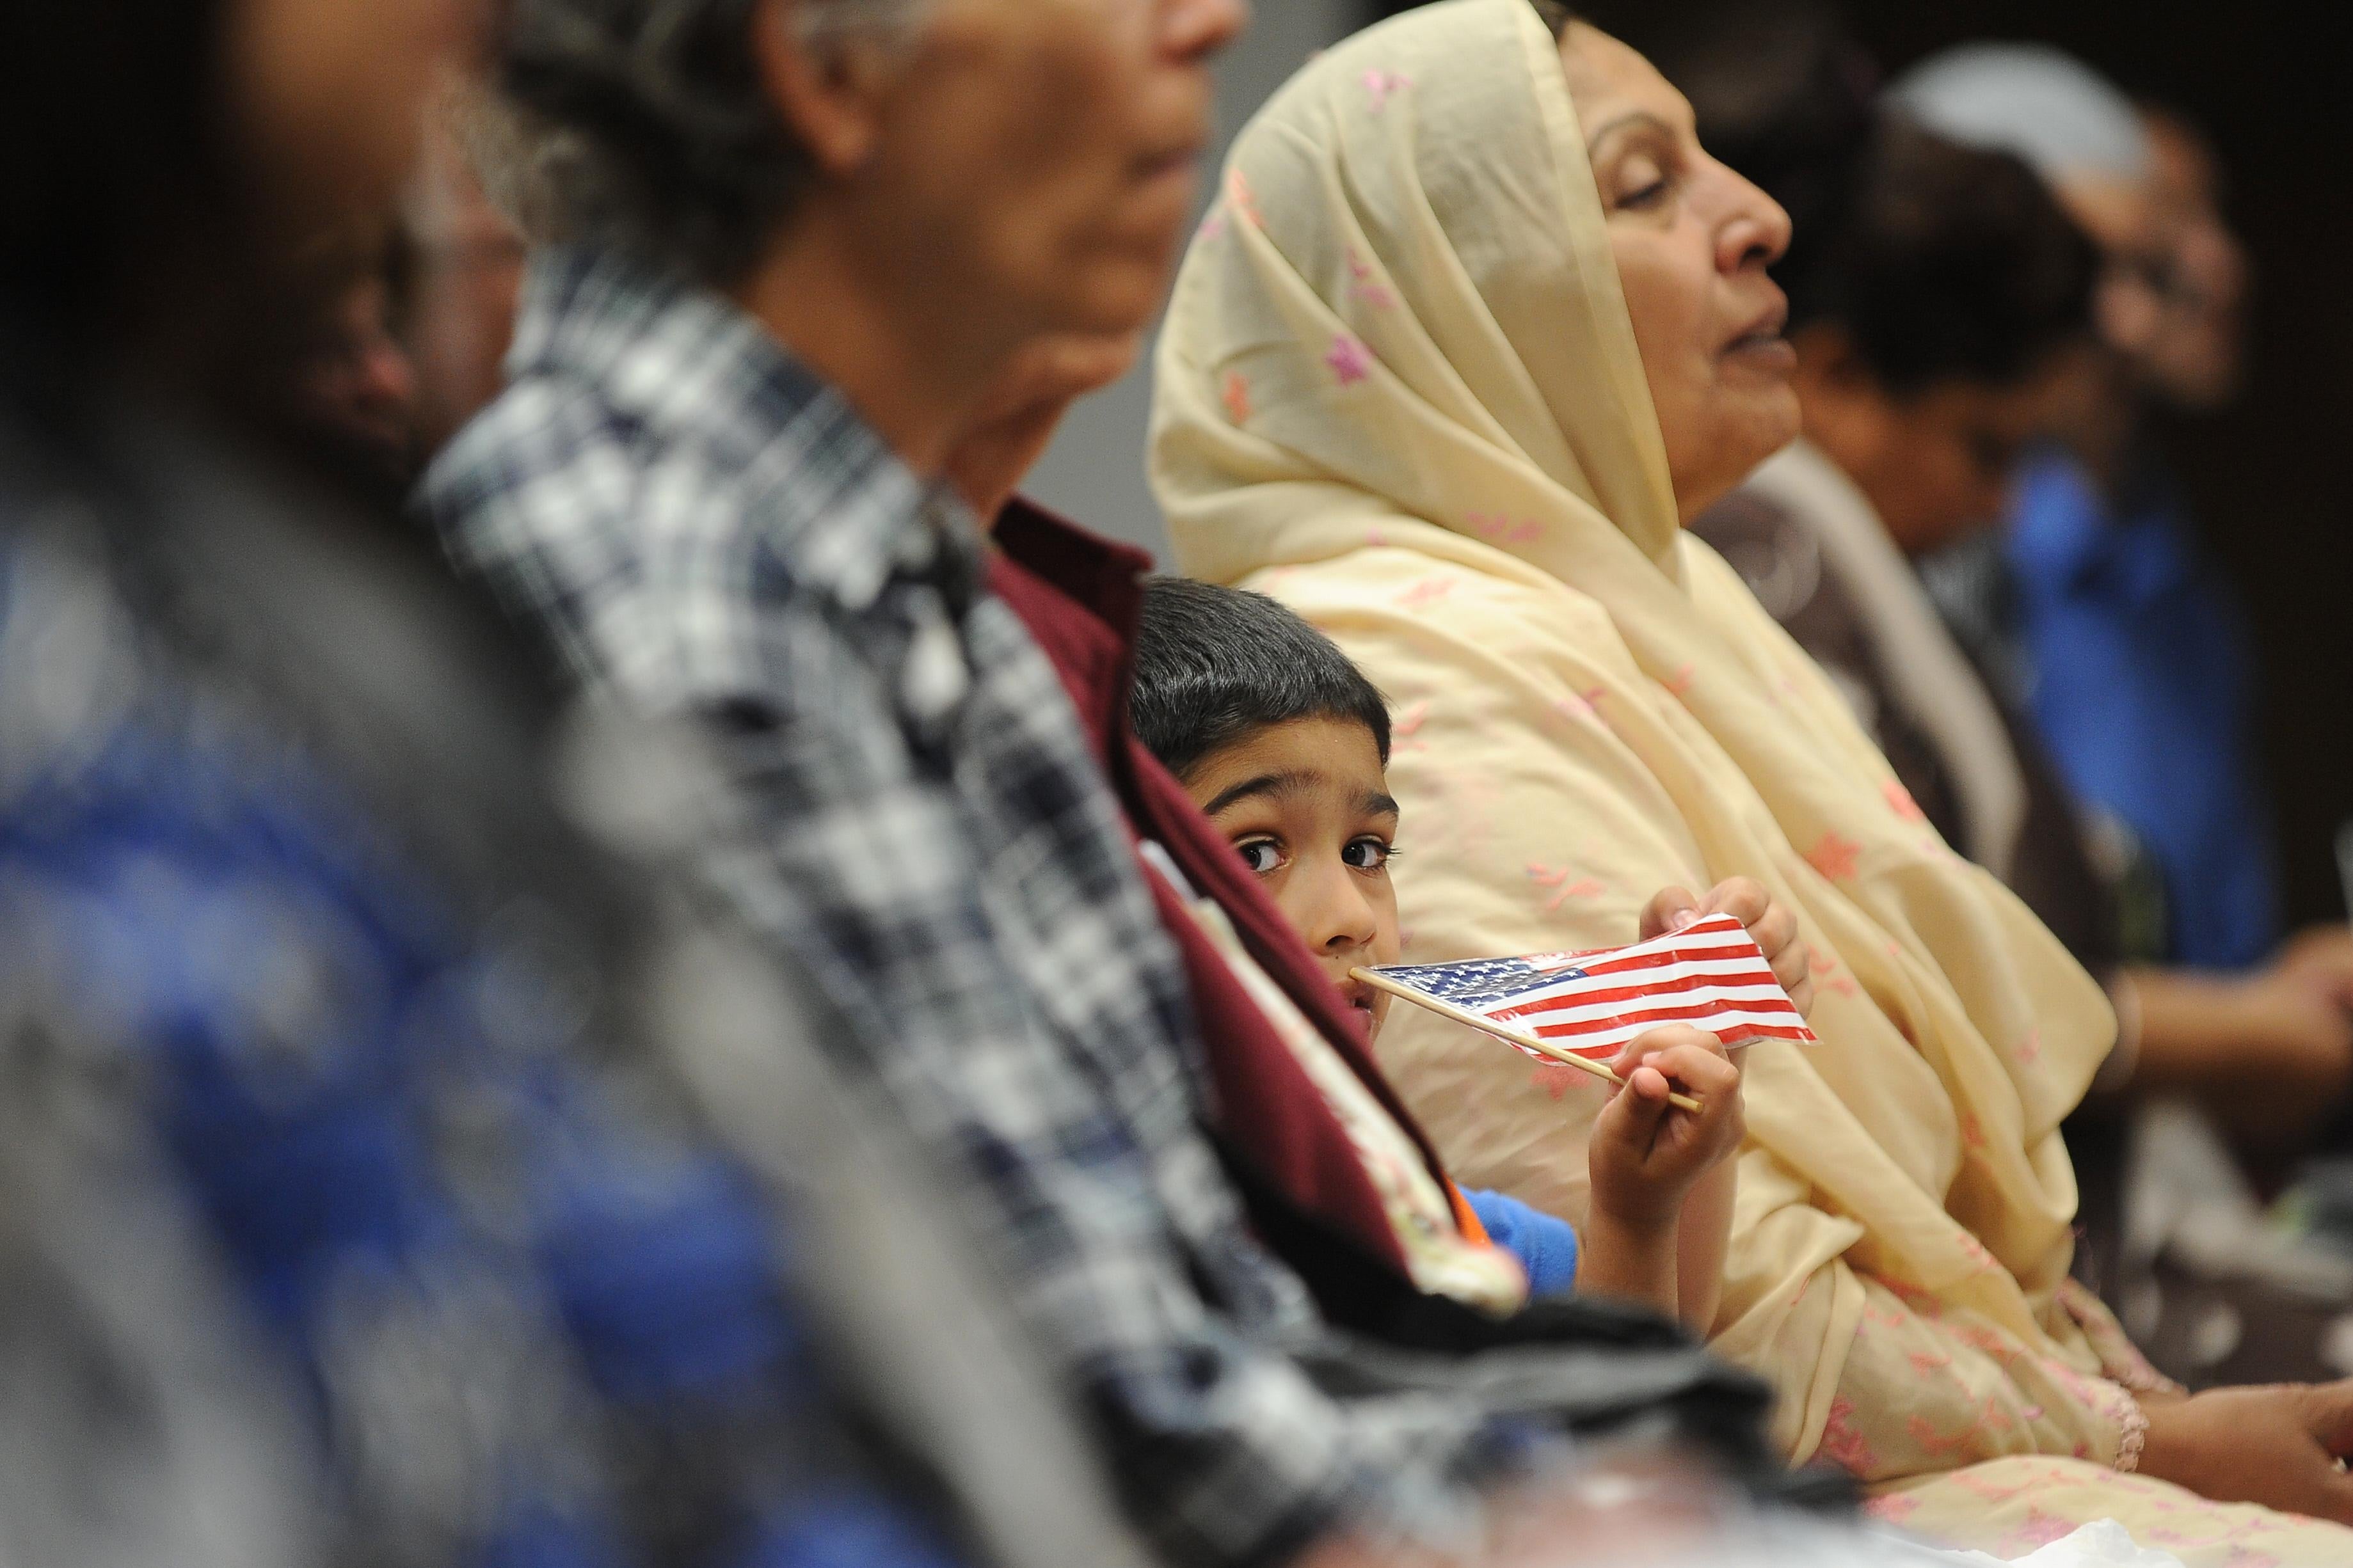 A boy sitting in the audience holds a small American flag next to an older woman wearing a headscarf